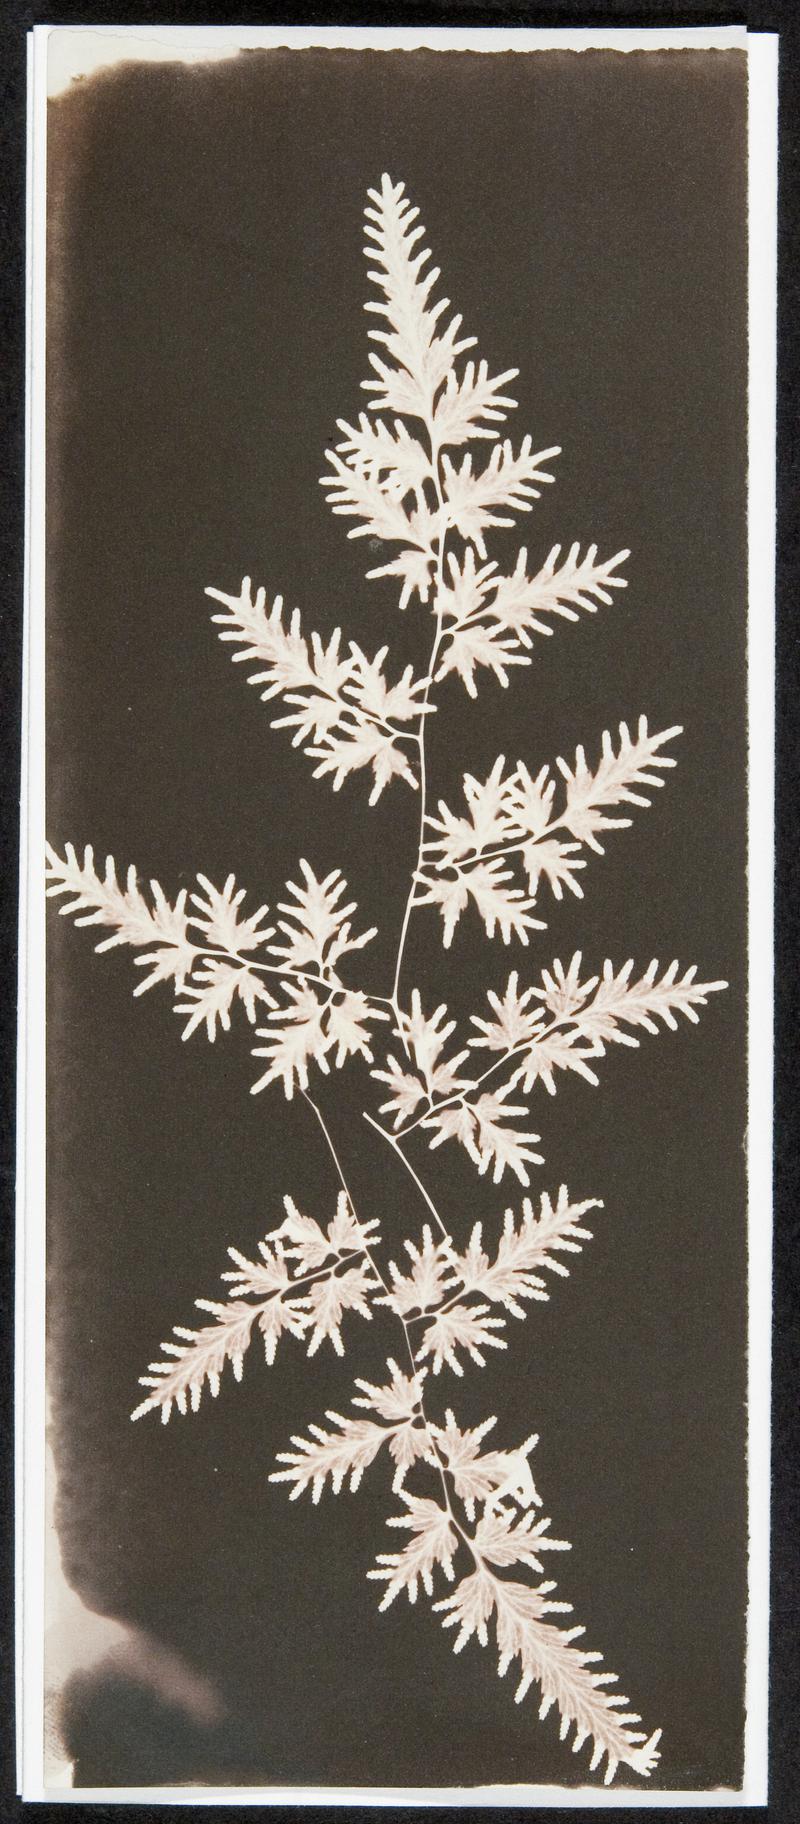 Photogenic drawing of fern leaves